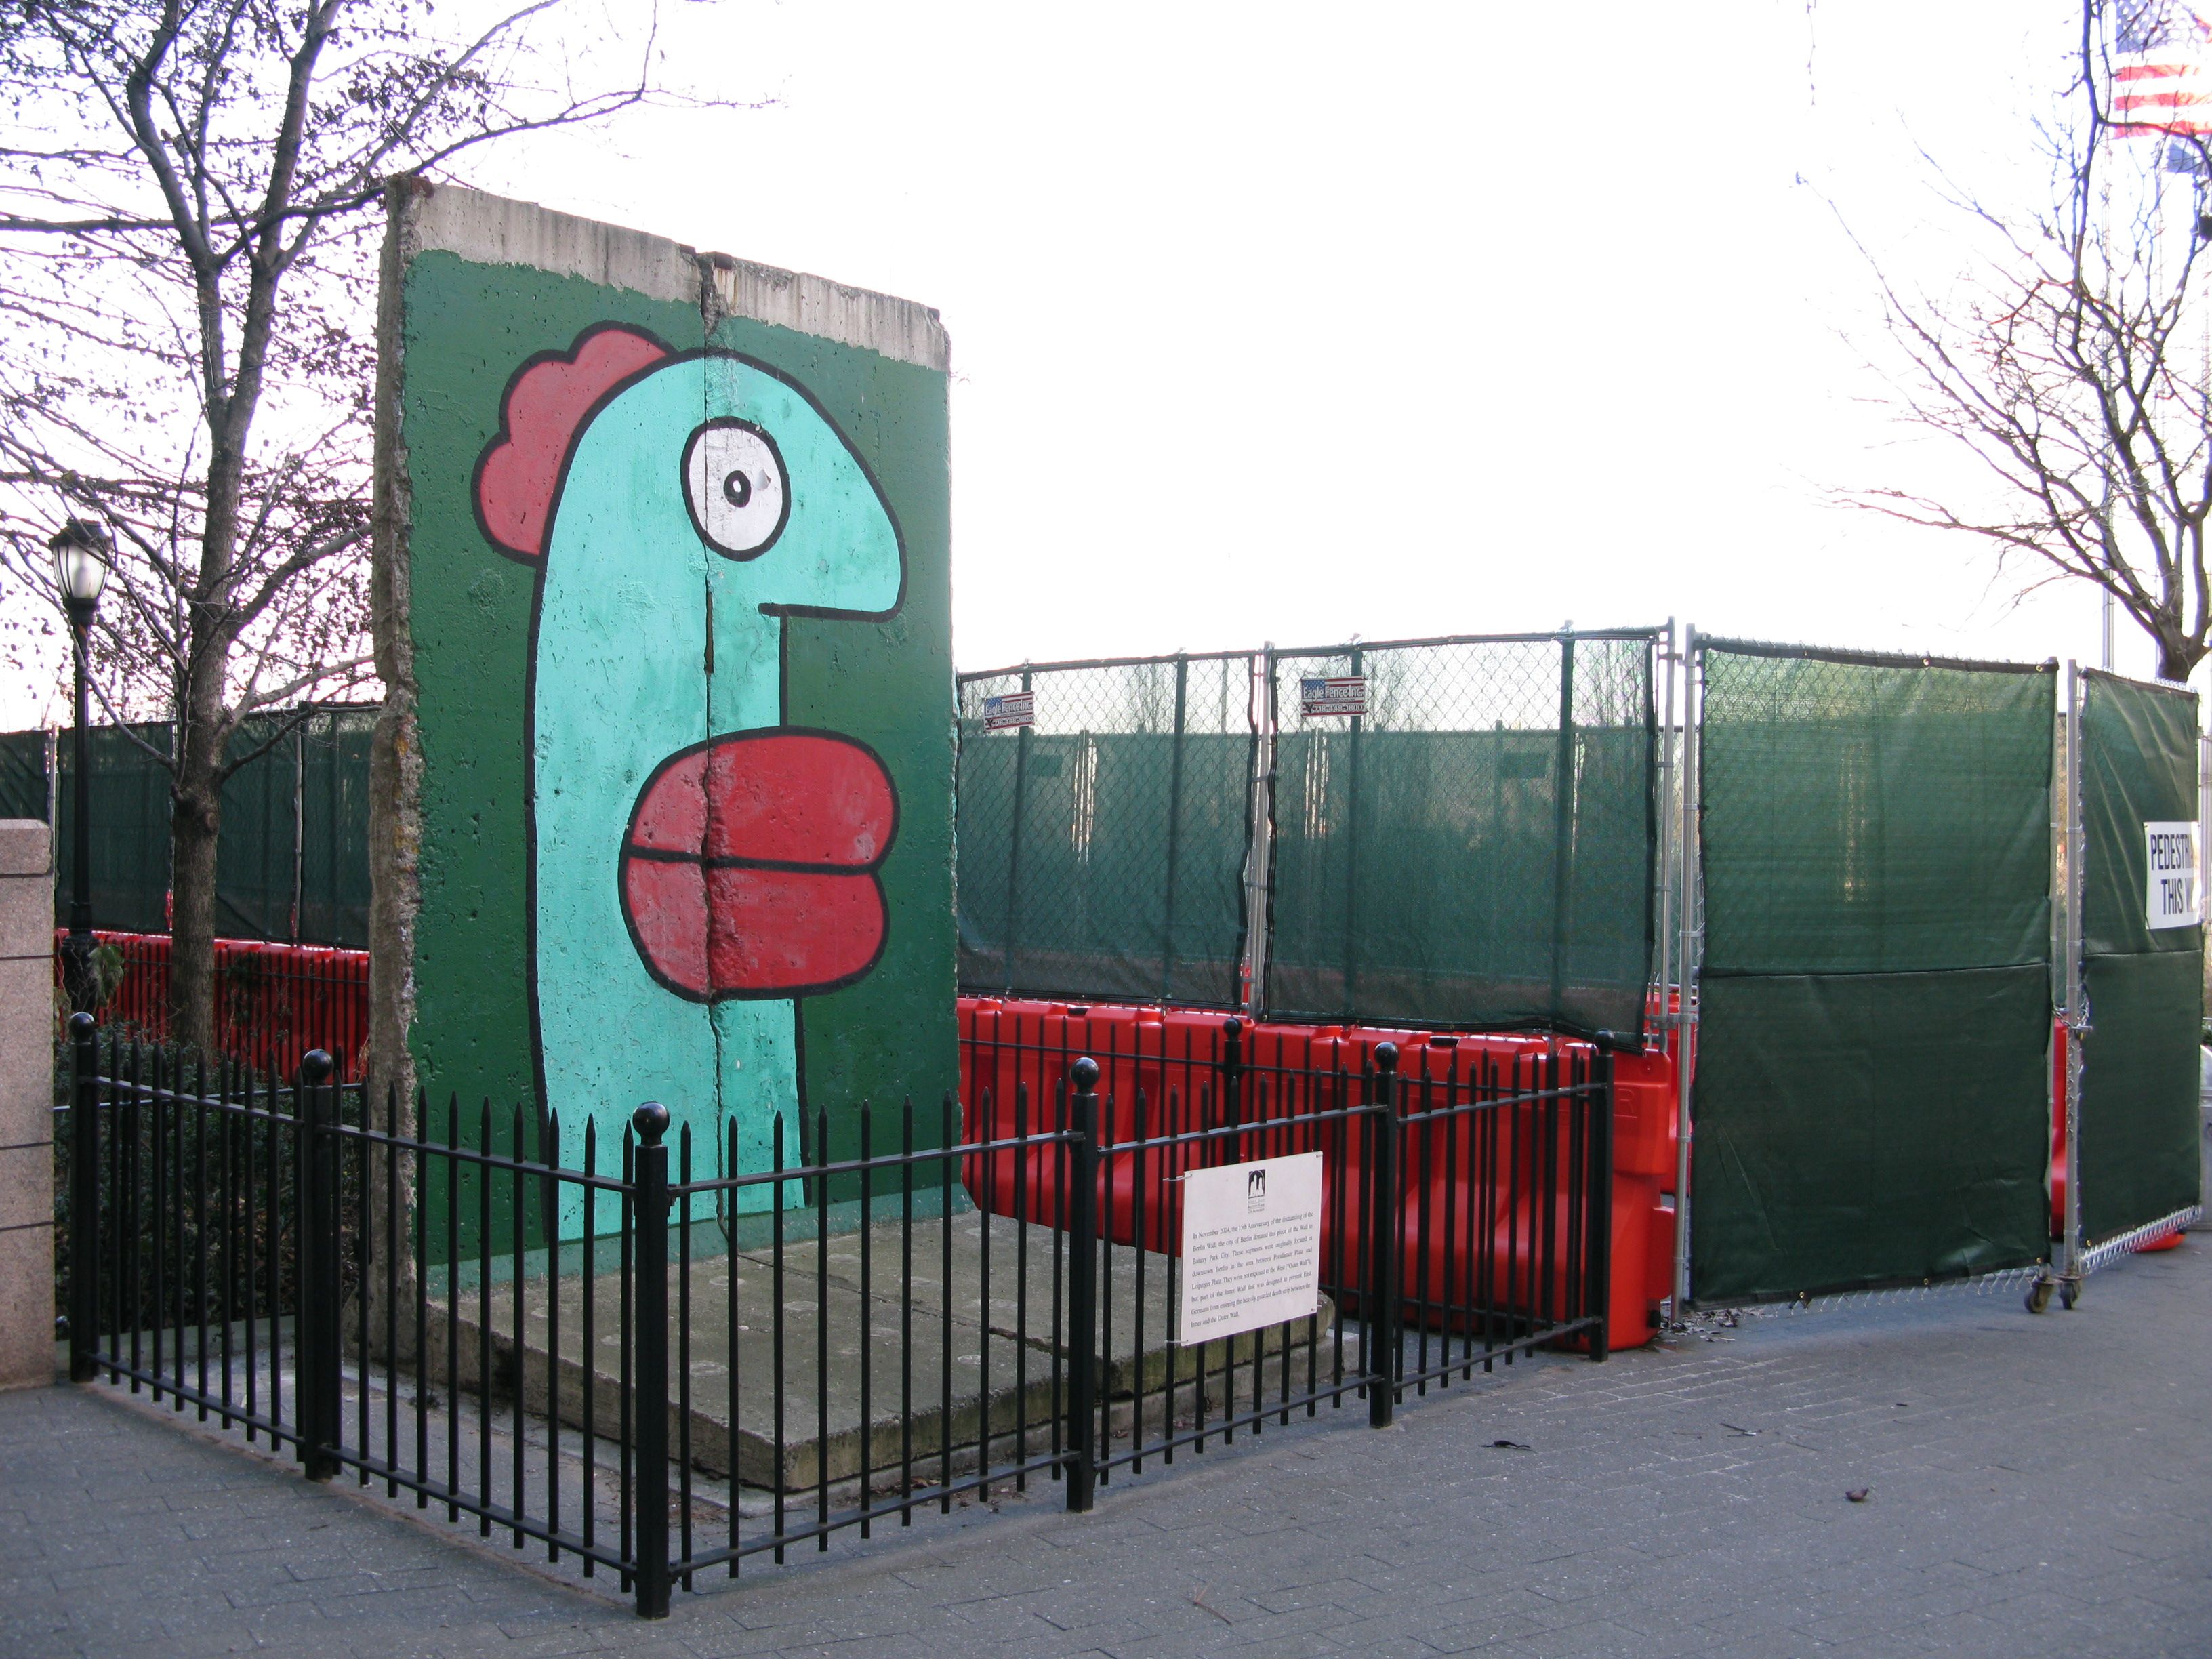 A segment of Berlin wall in New York City